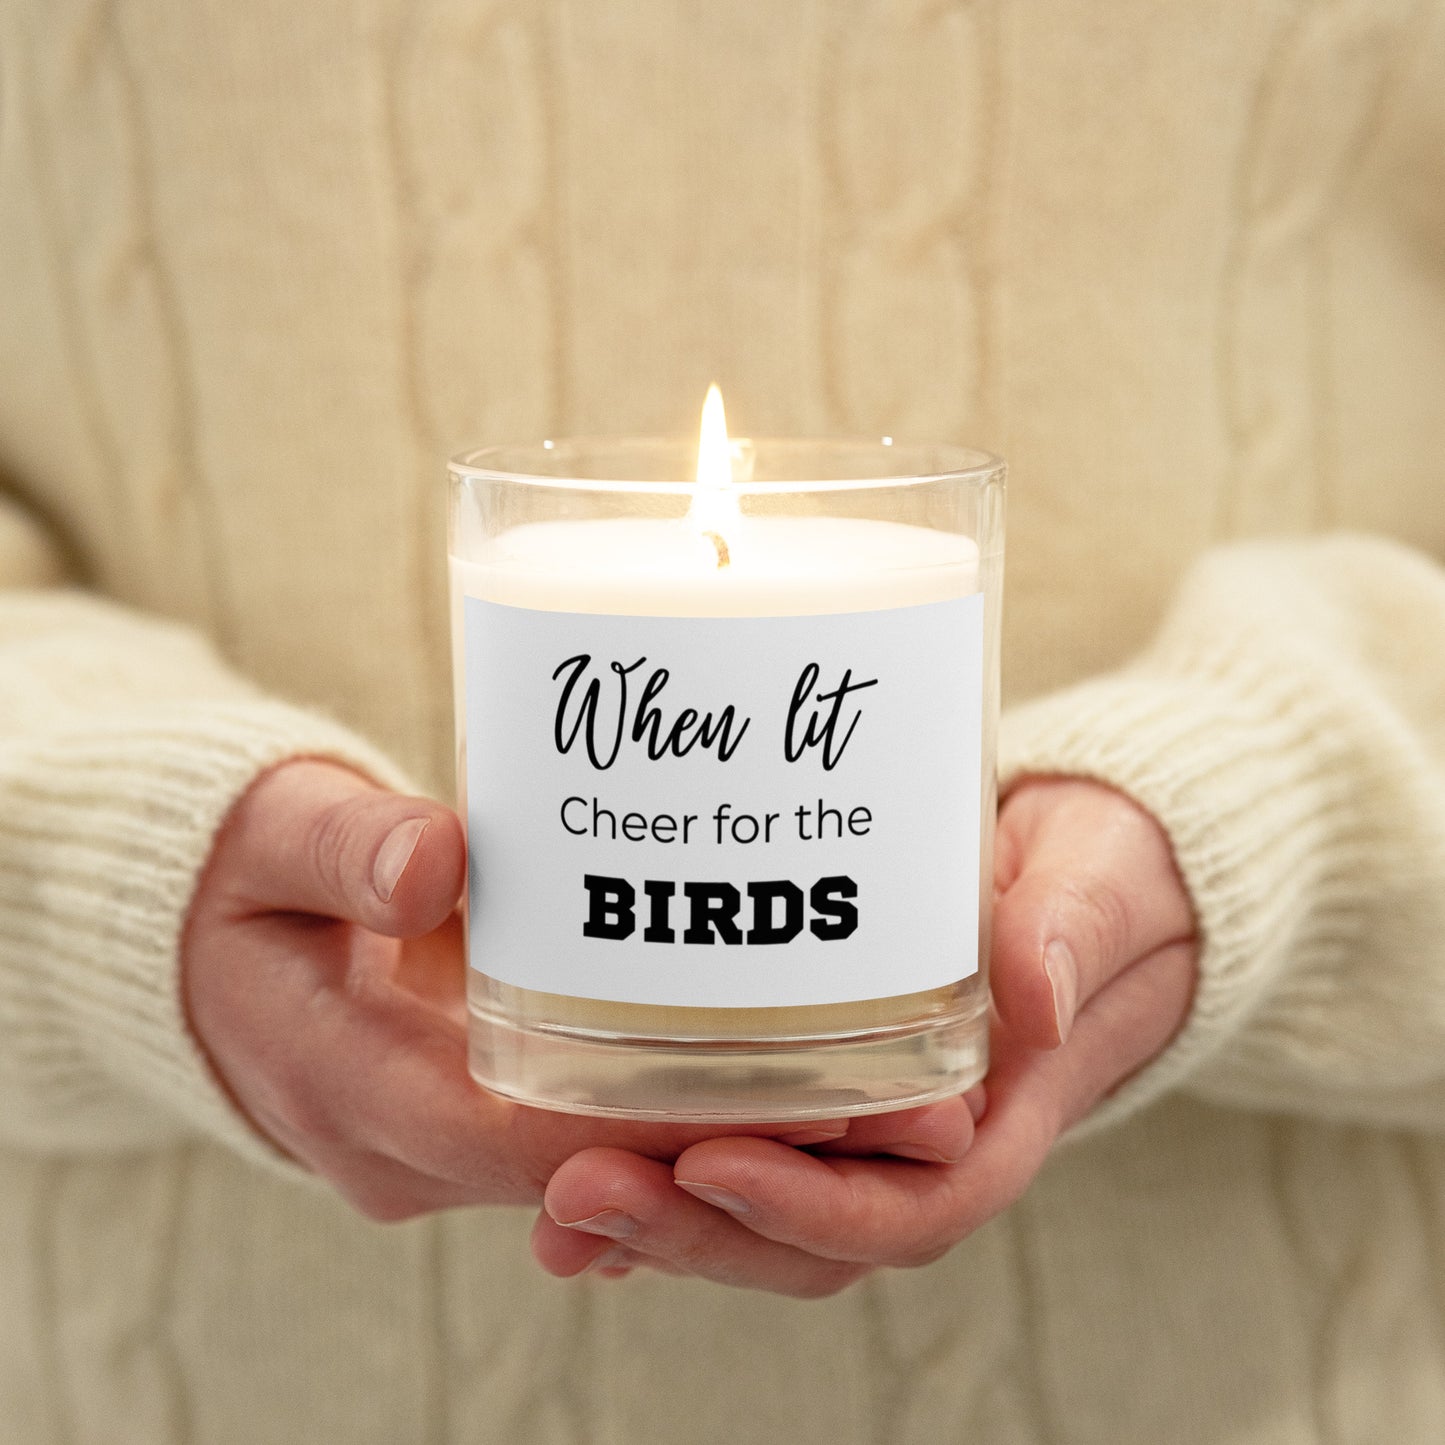 When Lit Cheer for the Birds Glass jar soy wax candle